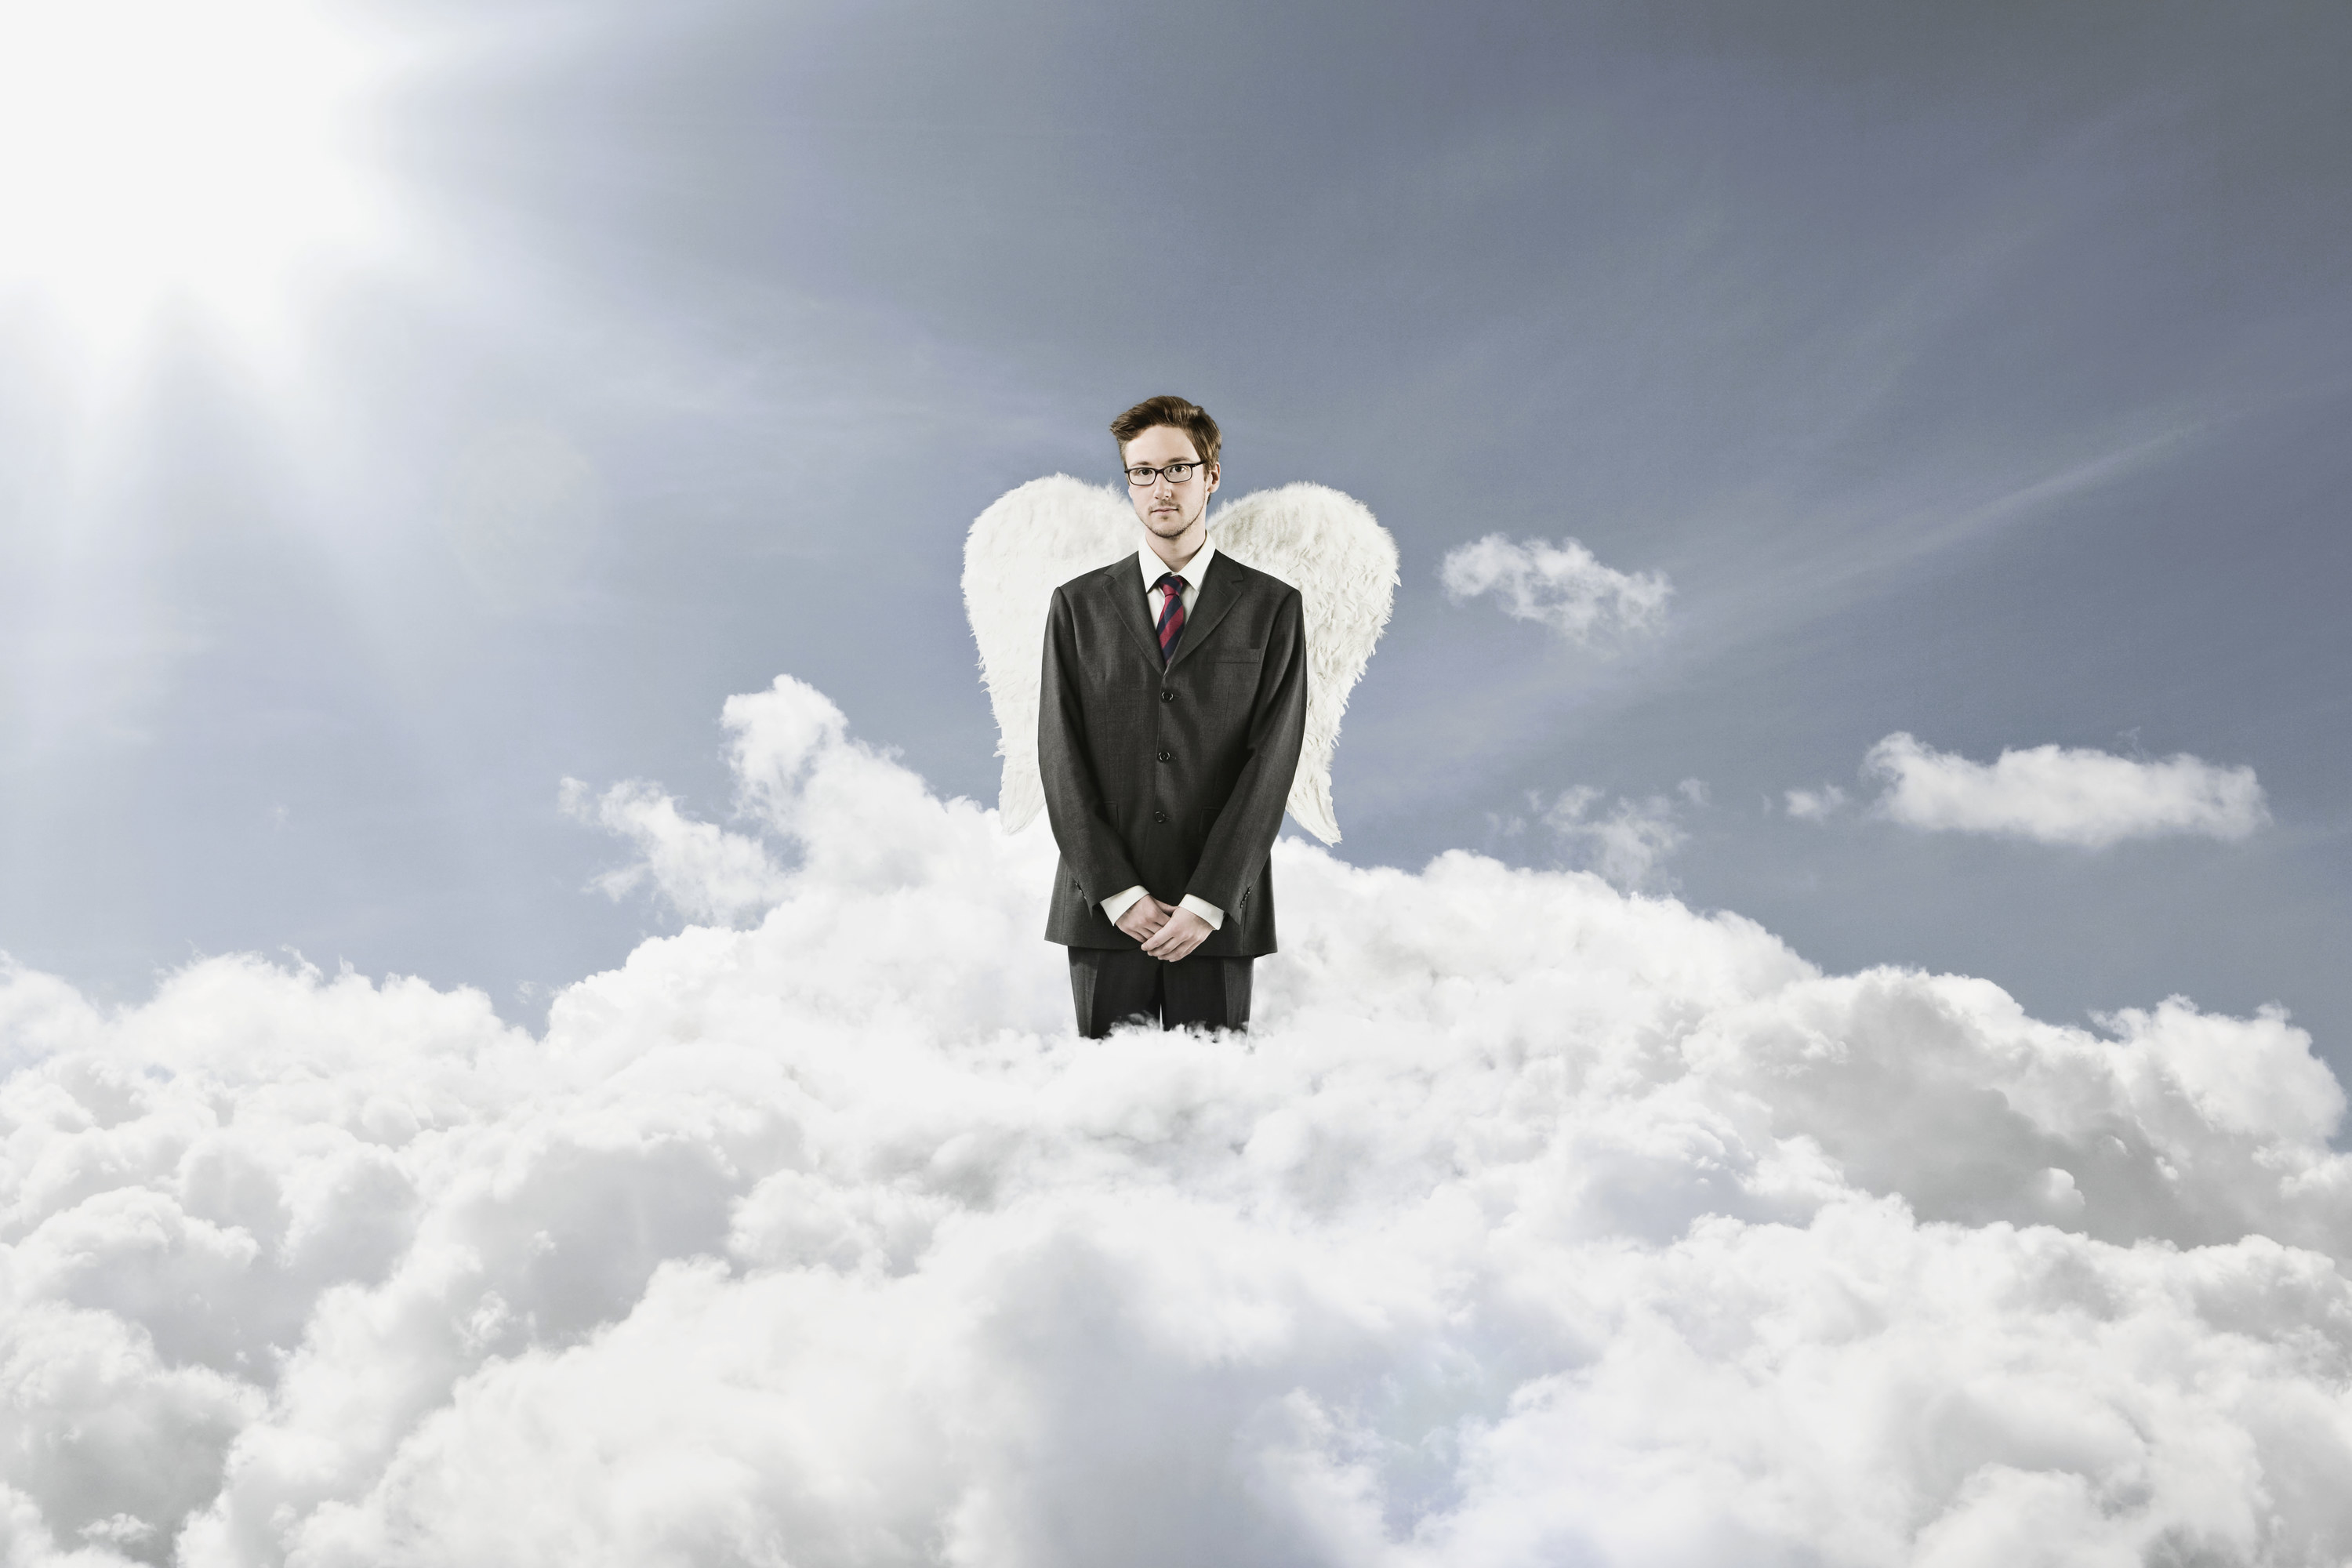 A man in a business suit stands in the midst of clouds and has angel wings